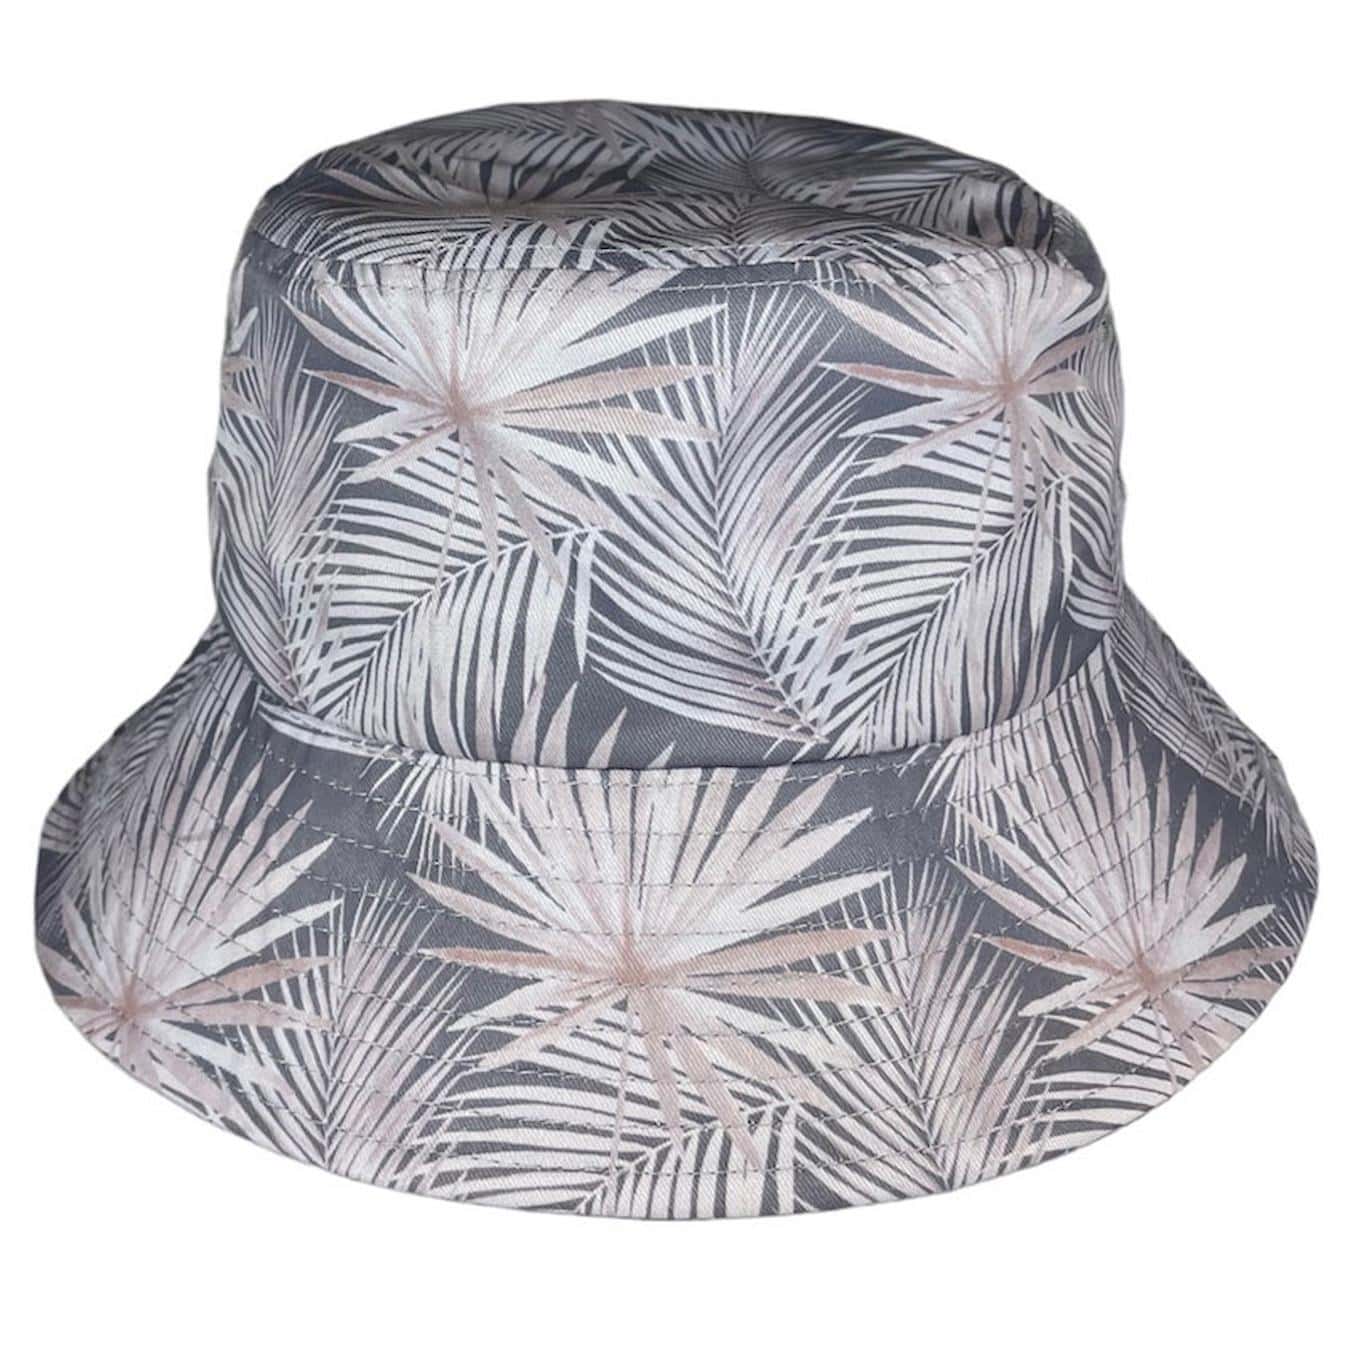 double portion supply the tan palms bucket hat company swag items company swag ideas company swag ideas coffee mugs promotional products